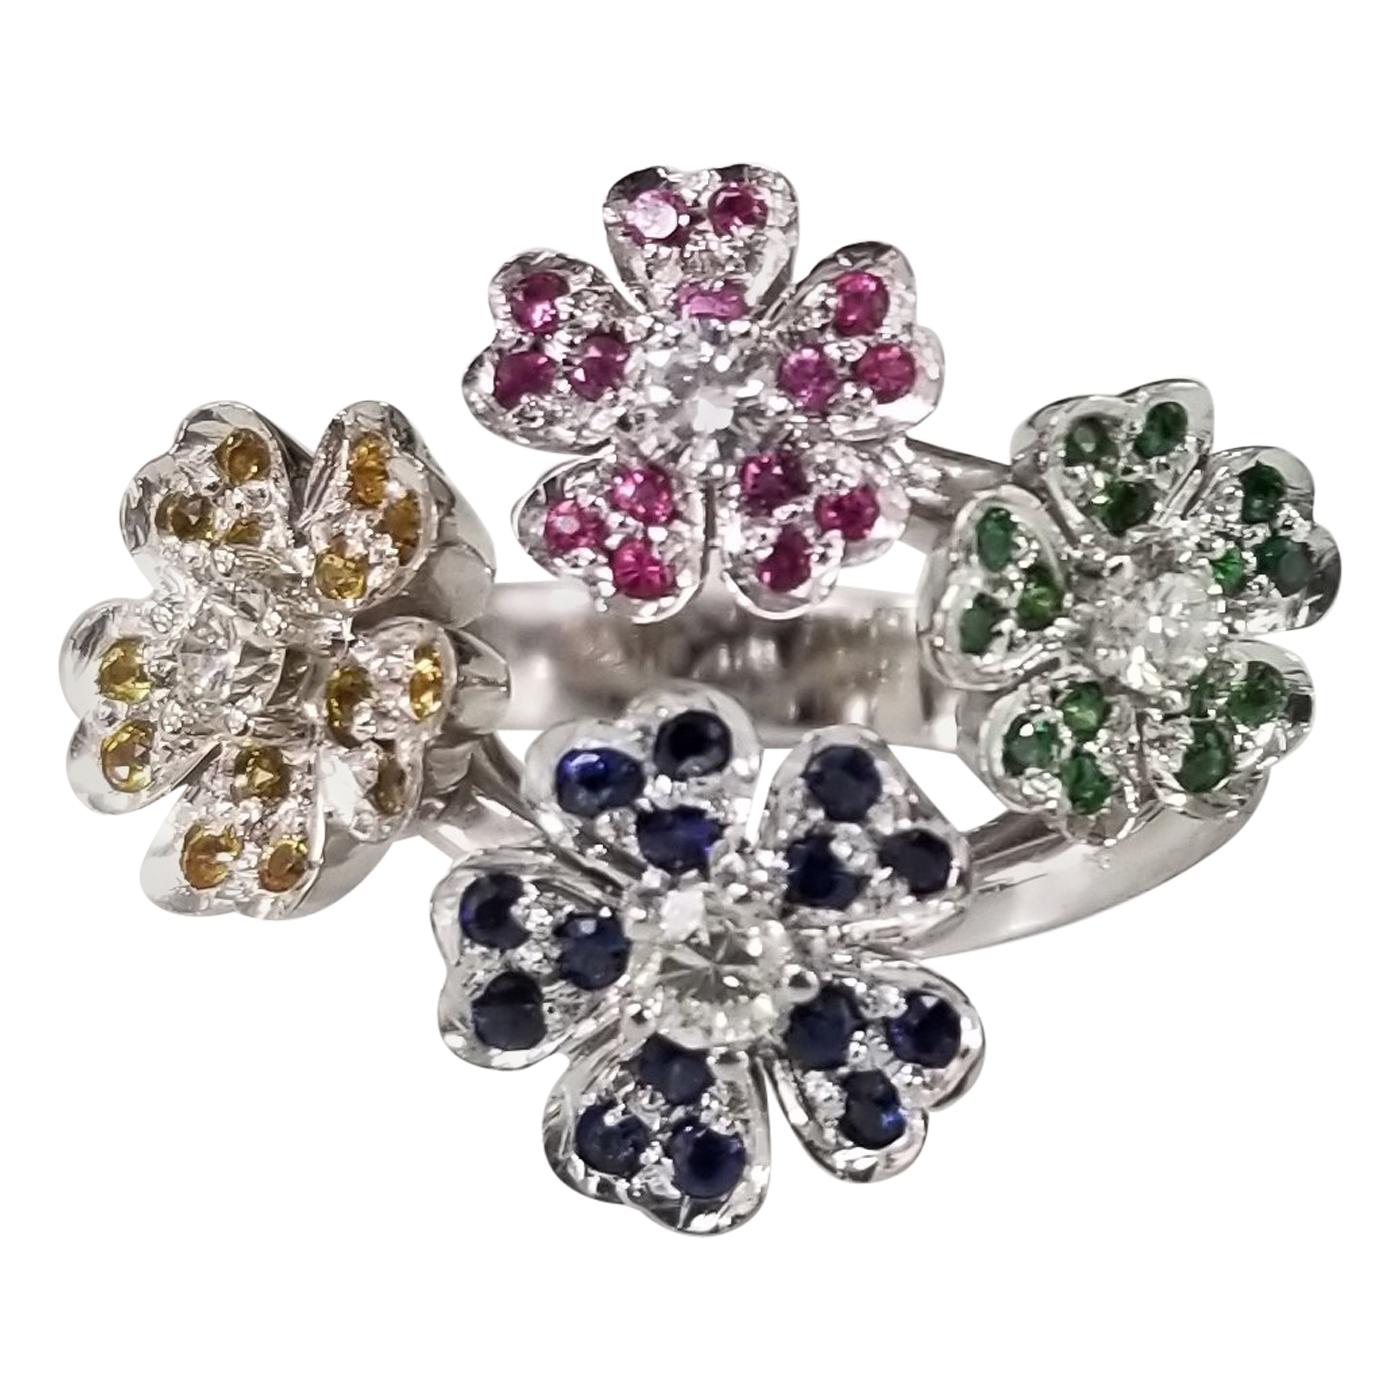 14 Karat White Gold "Bouquet" of Colored Stones Flowers Ring For Sale